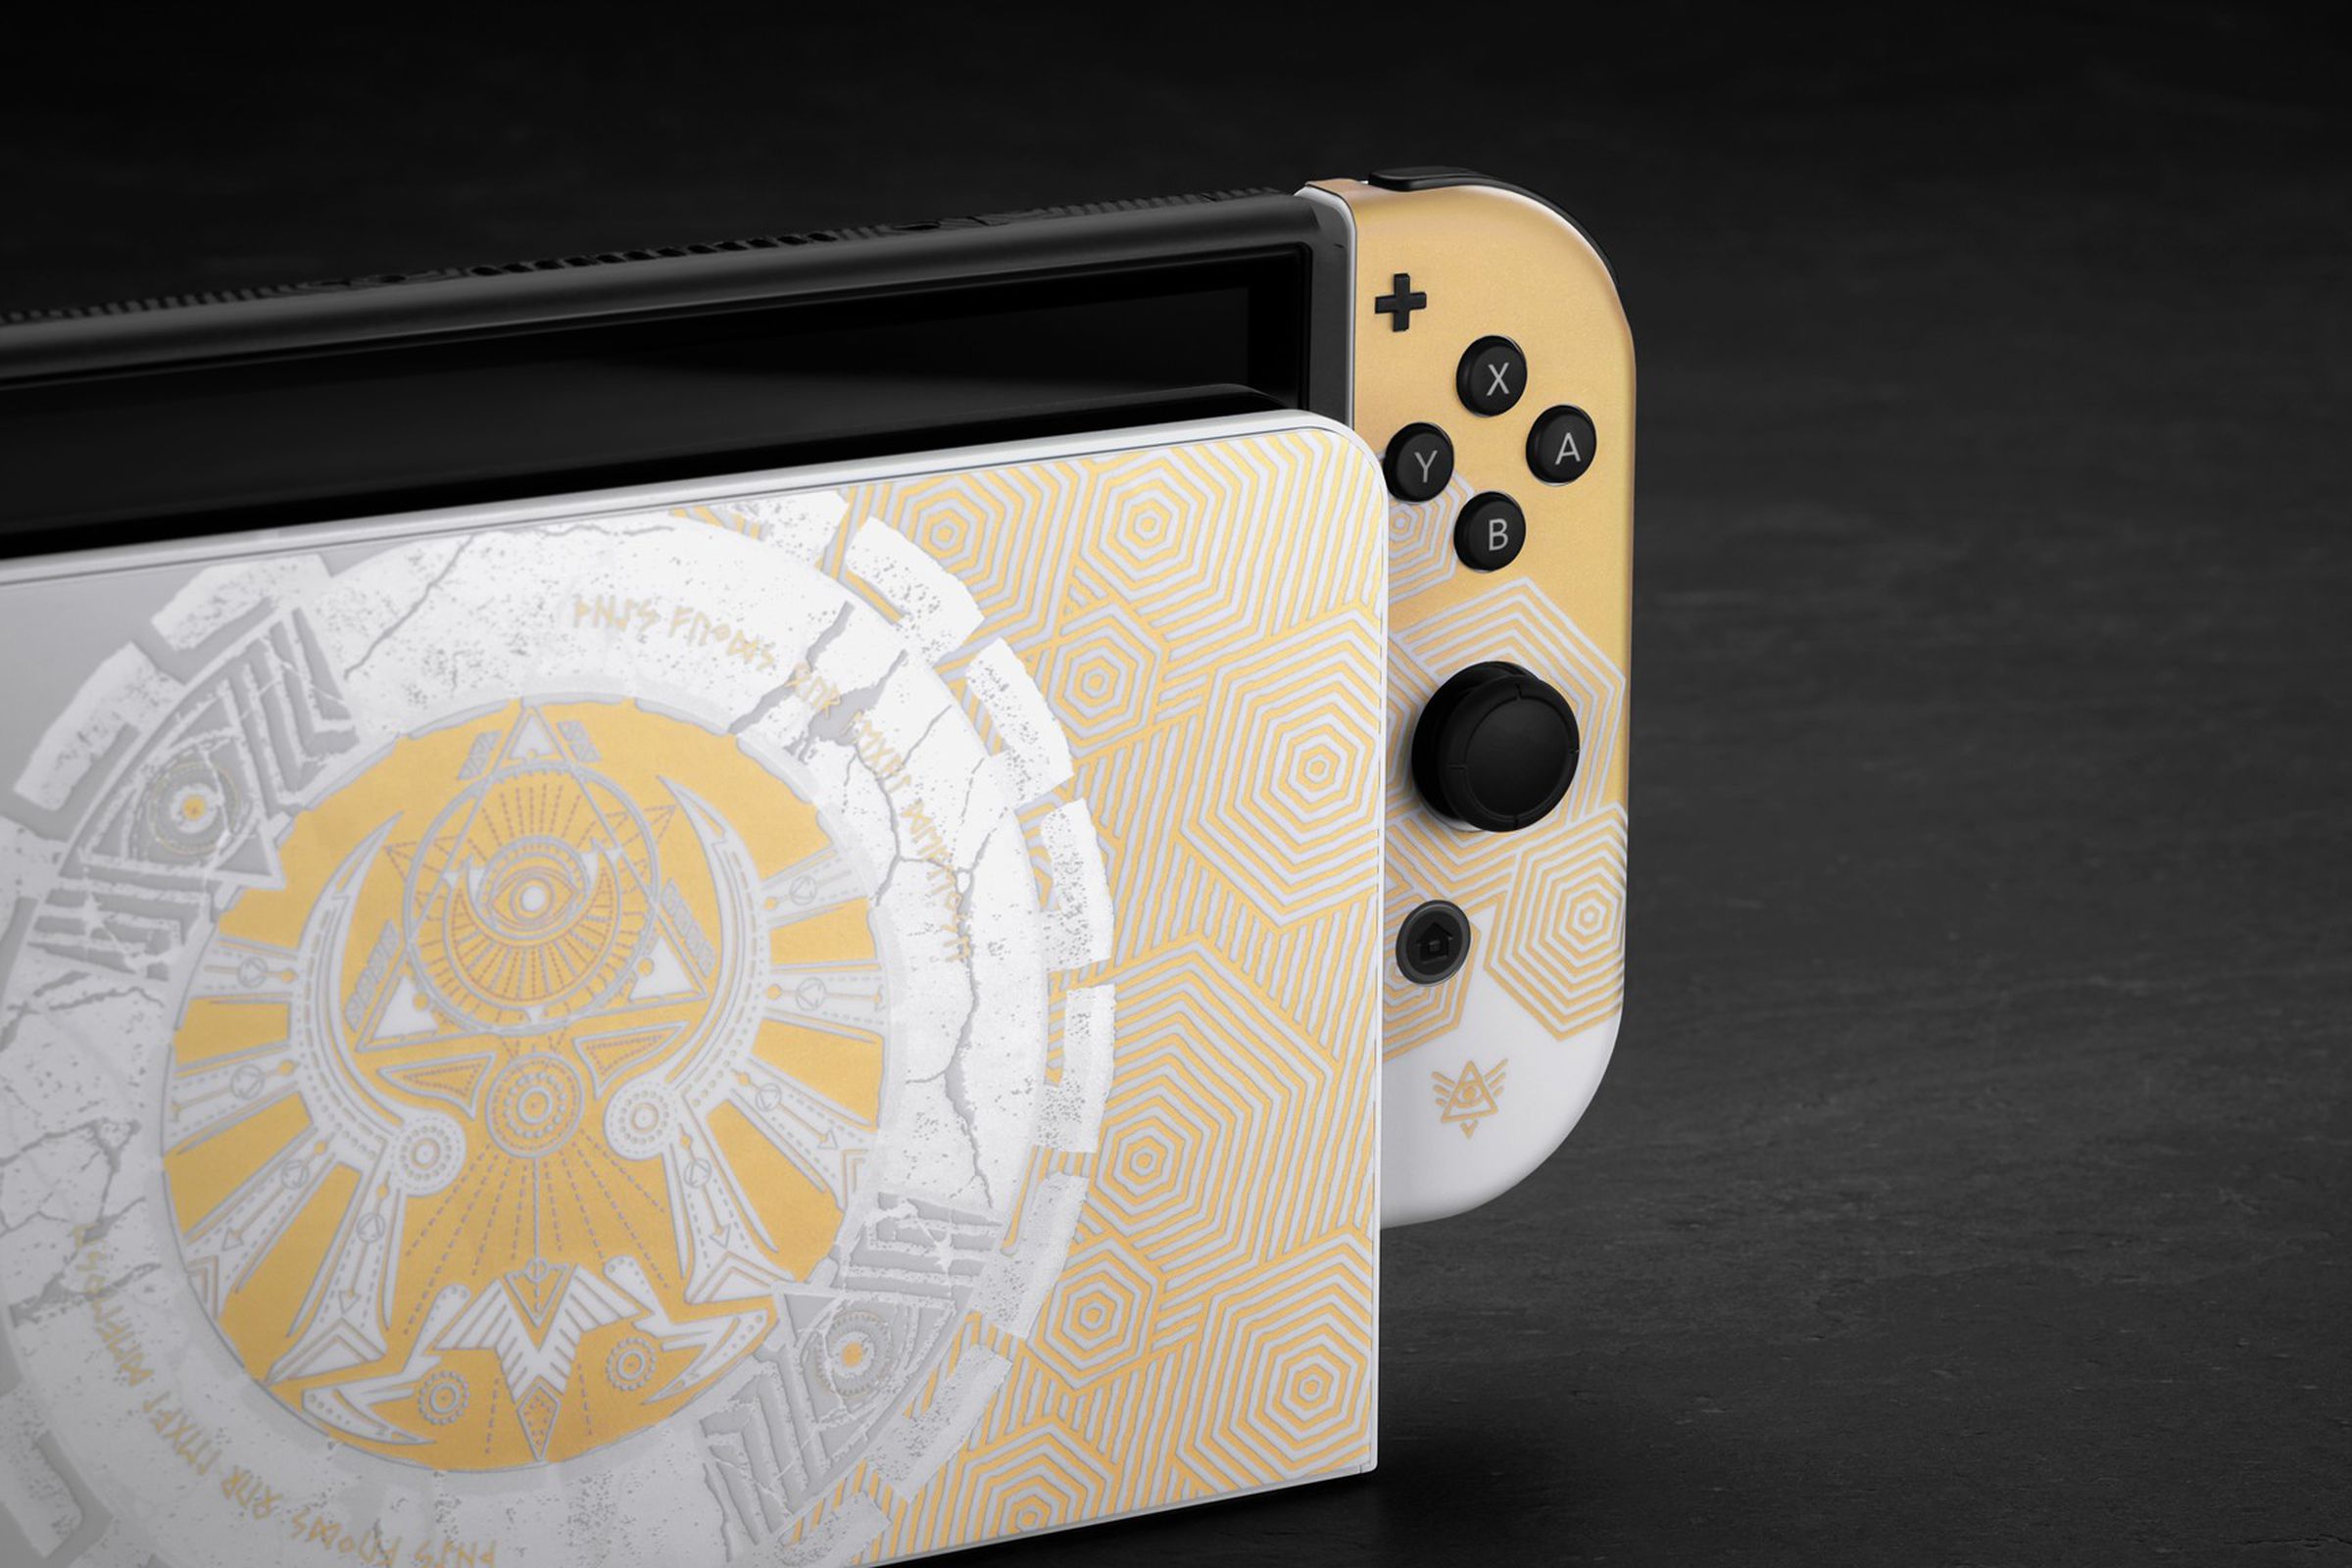 A gold and white skin on a Nintendo Switch that seems Zelda themed, but with an eye in a pyramid and concentric hexagons instead of concentric circles.